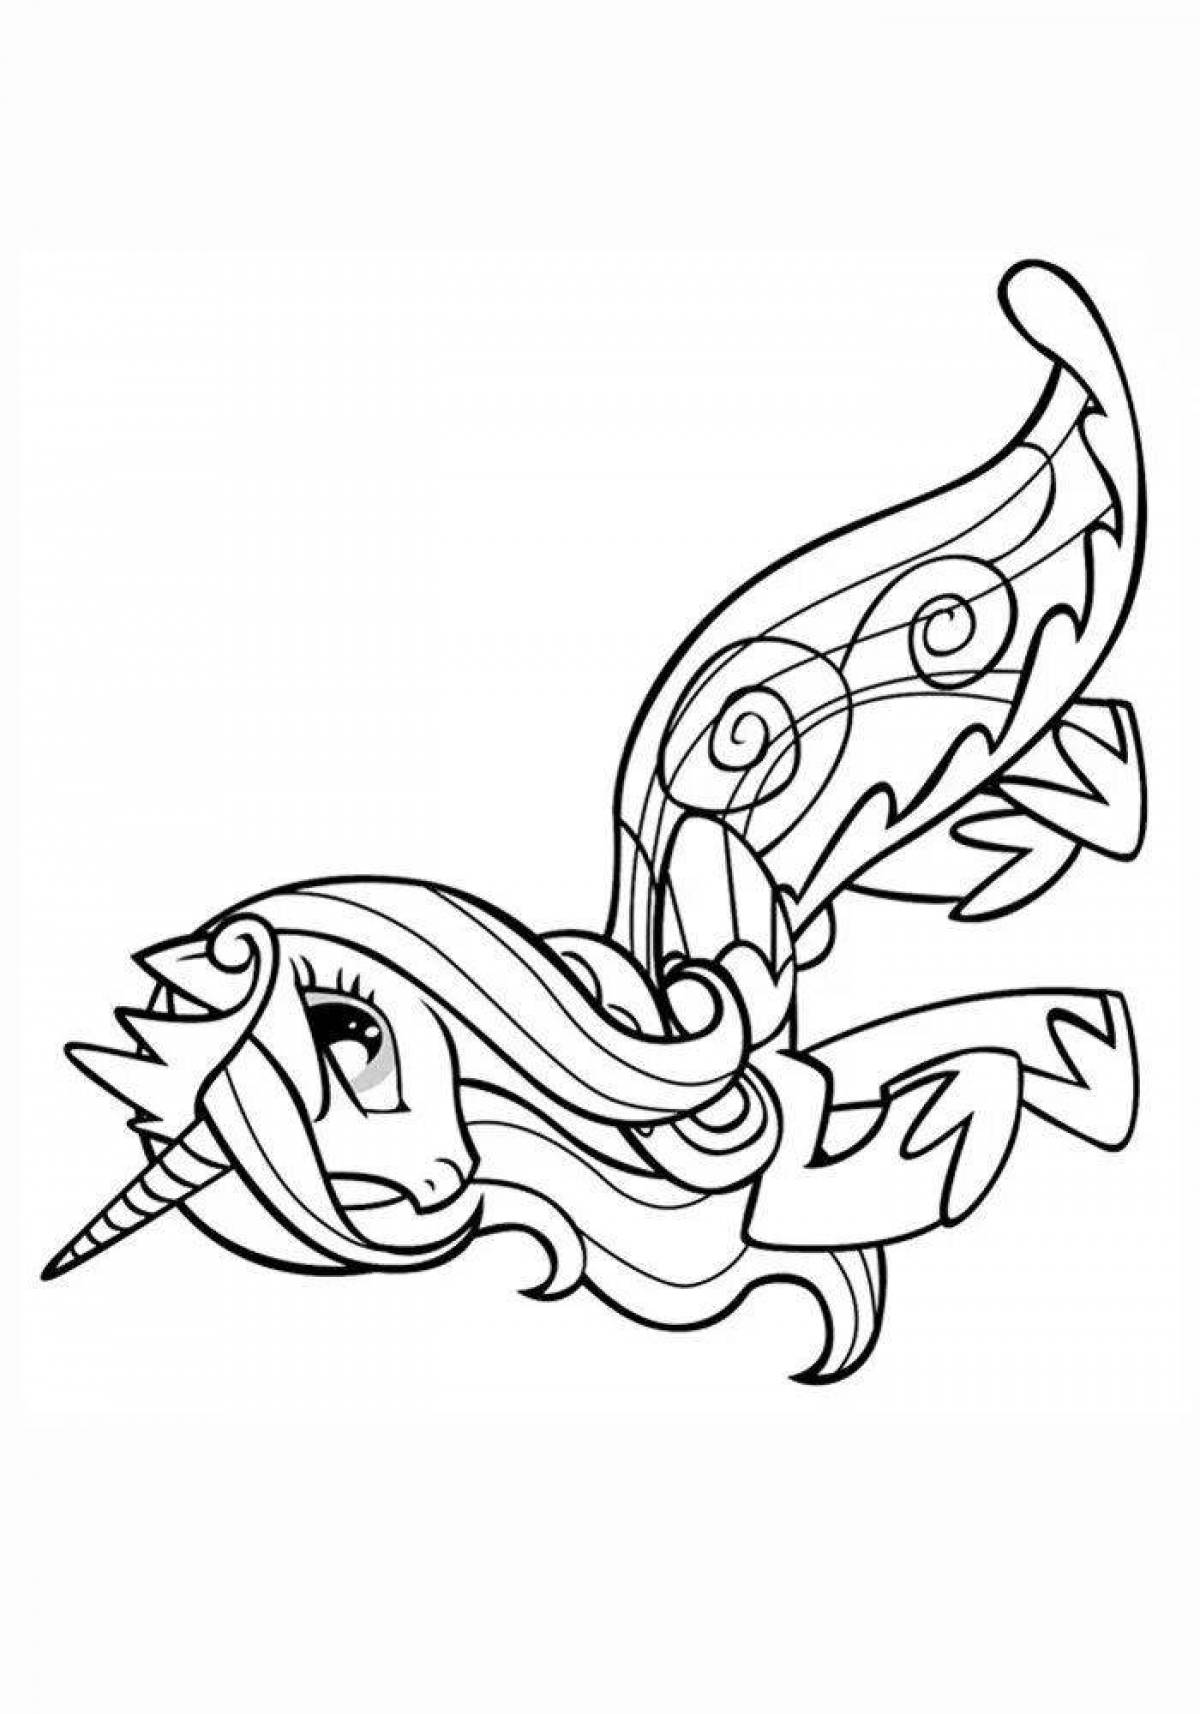 Color-blitzed cadence coloring page